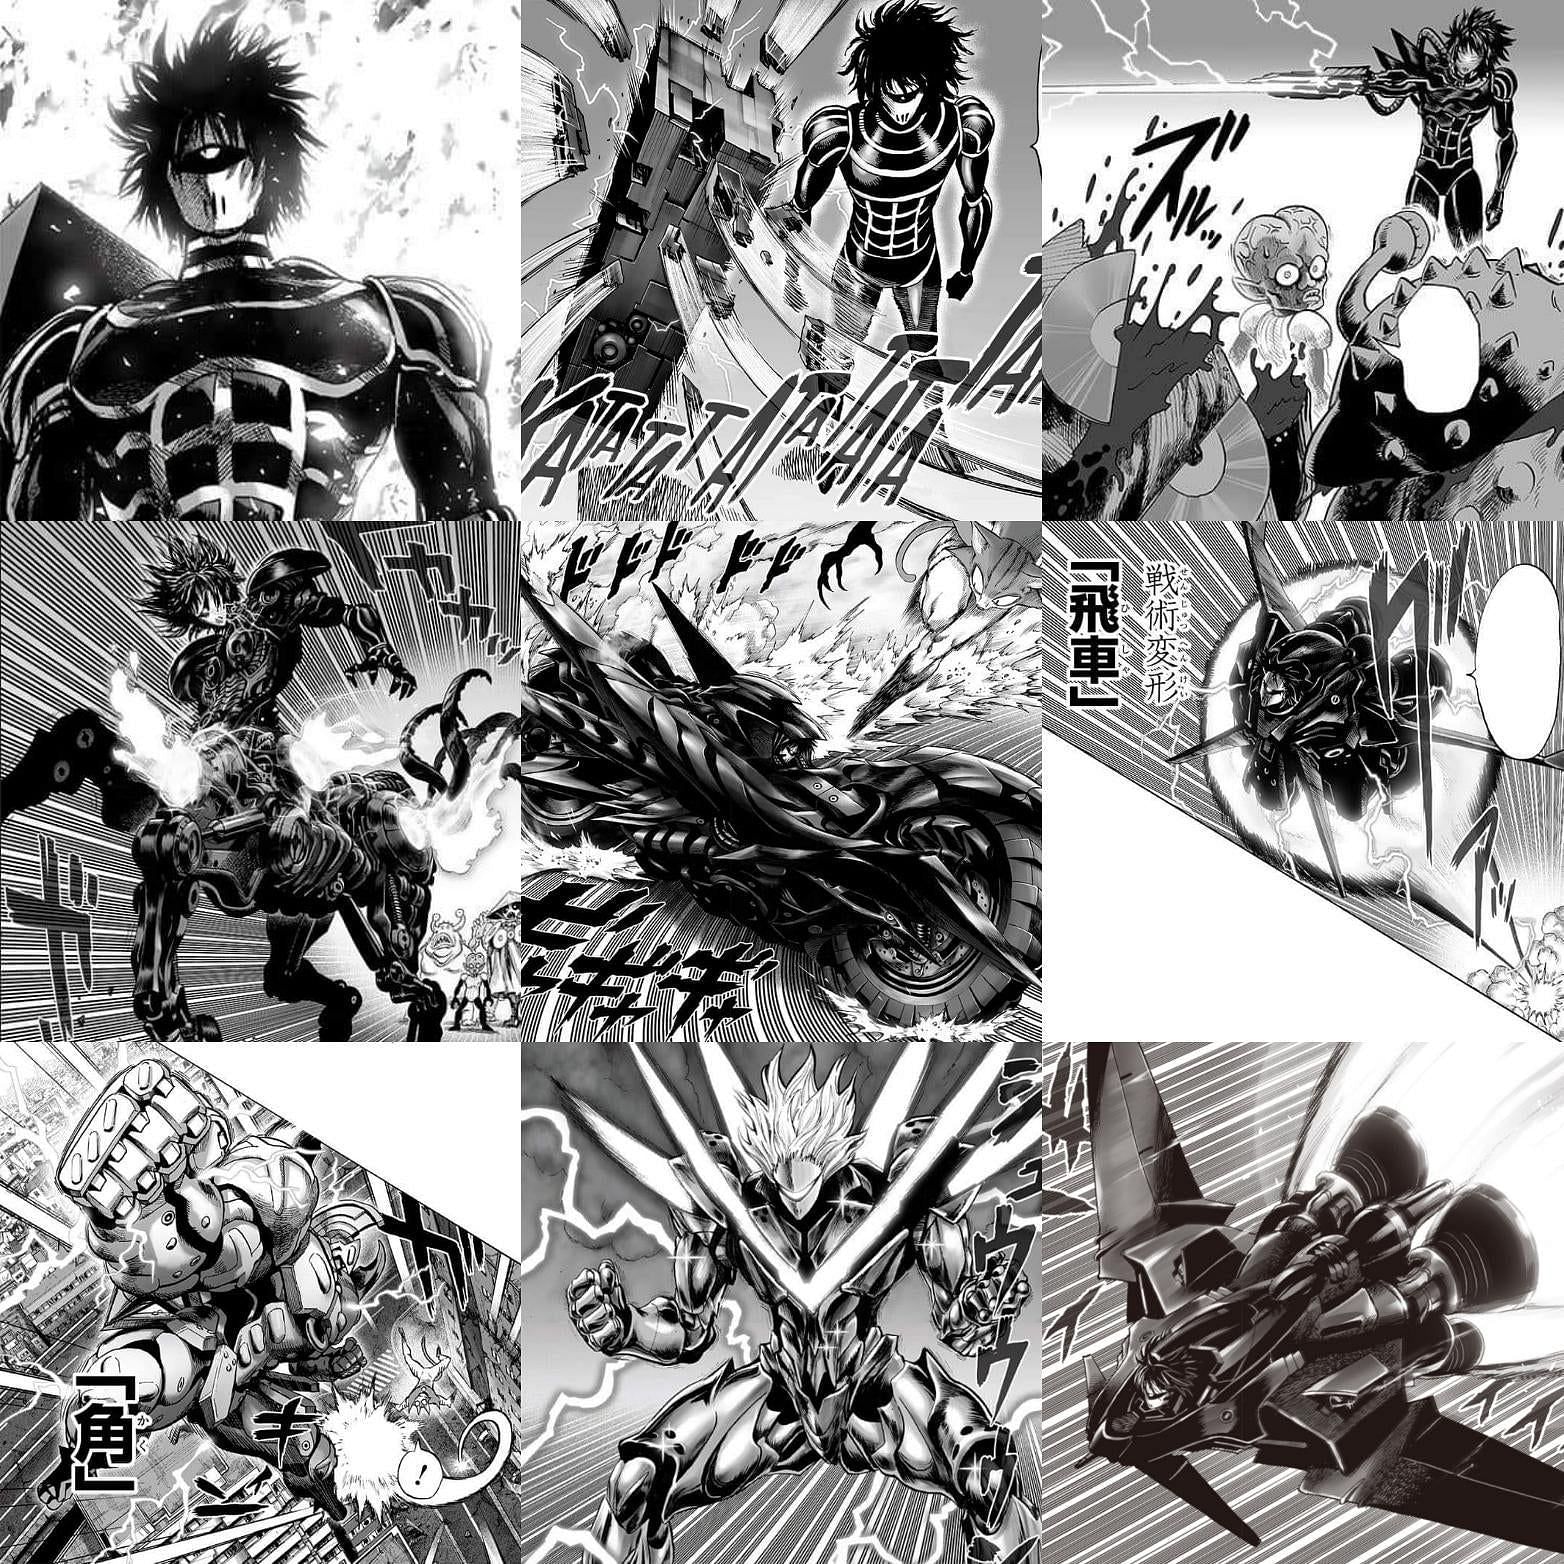 No Spoilers] The Evolution of One Punch Man, One-Punch Man